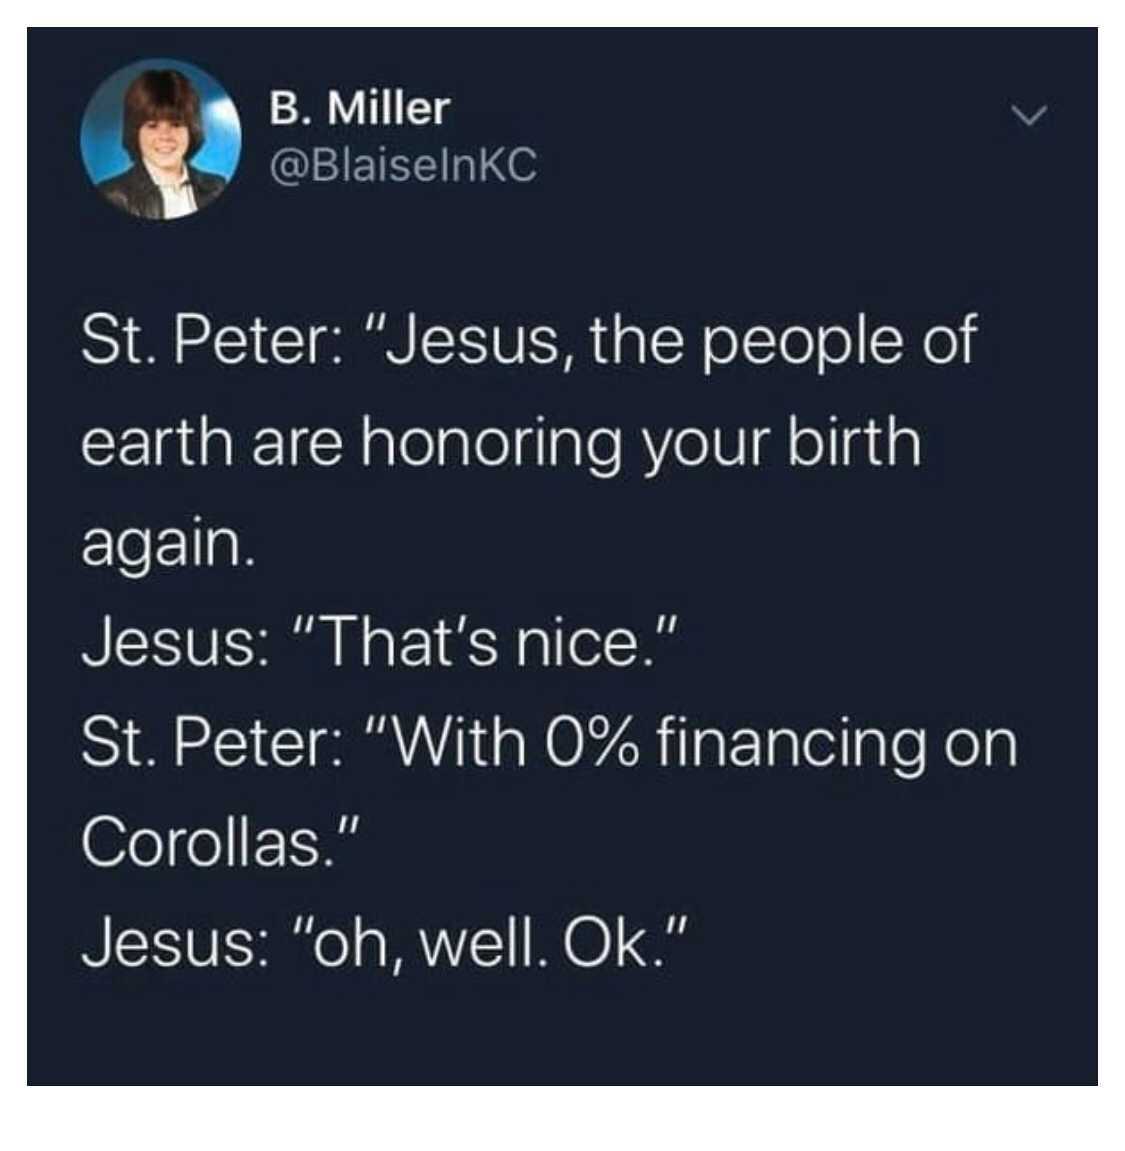 good night quotes - B. Miller St. Peter "Jesus, the people of earth are honoring your birth again. Jesus "That's nice." St. Peter "With 0% financing on Corollas." Jesus "oh, well. Ok."